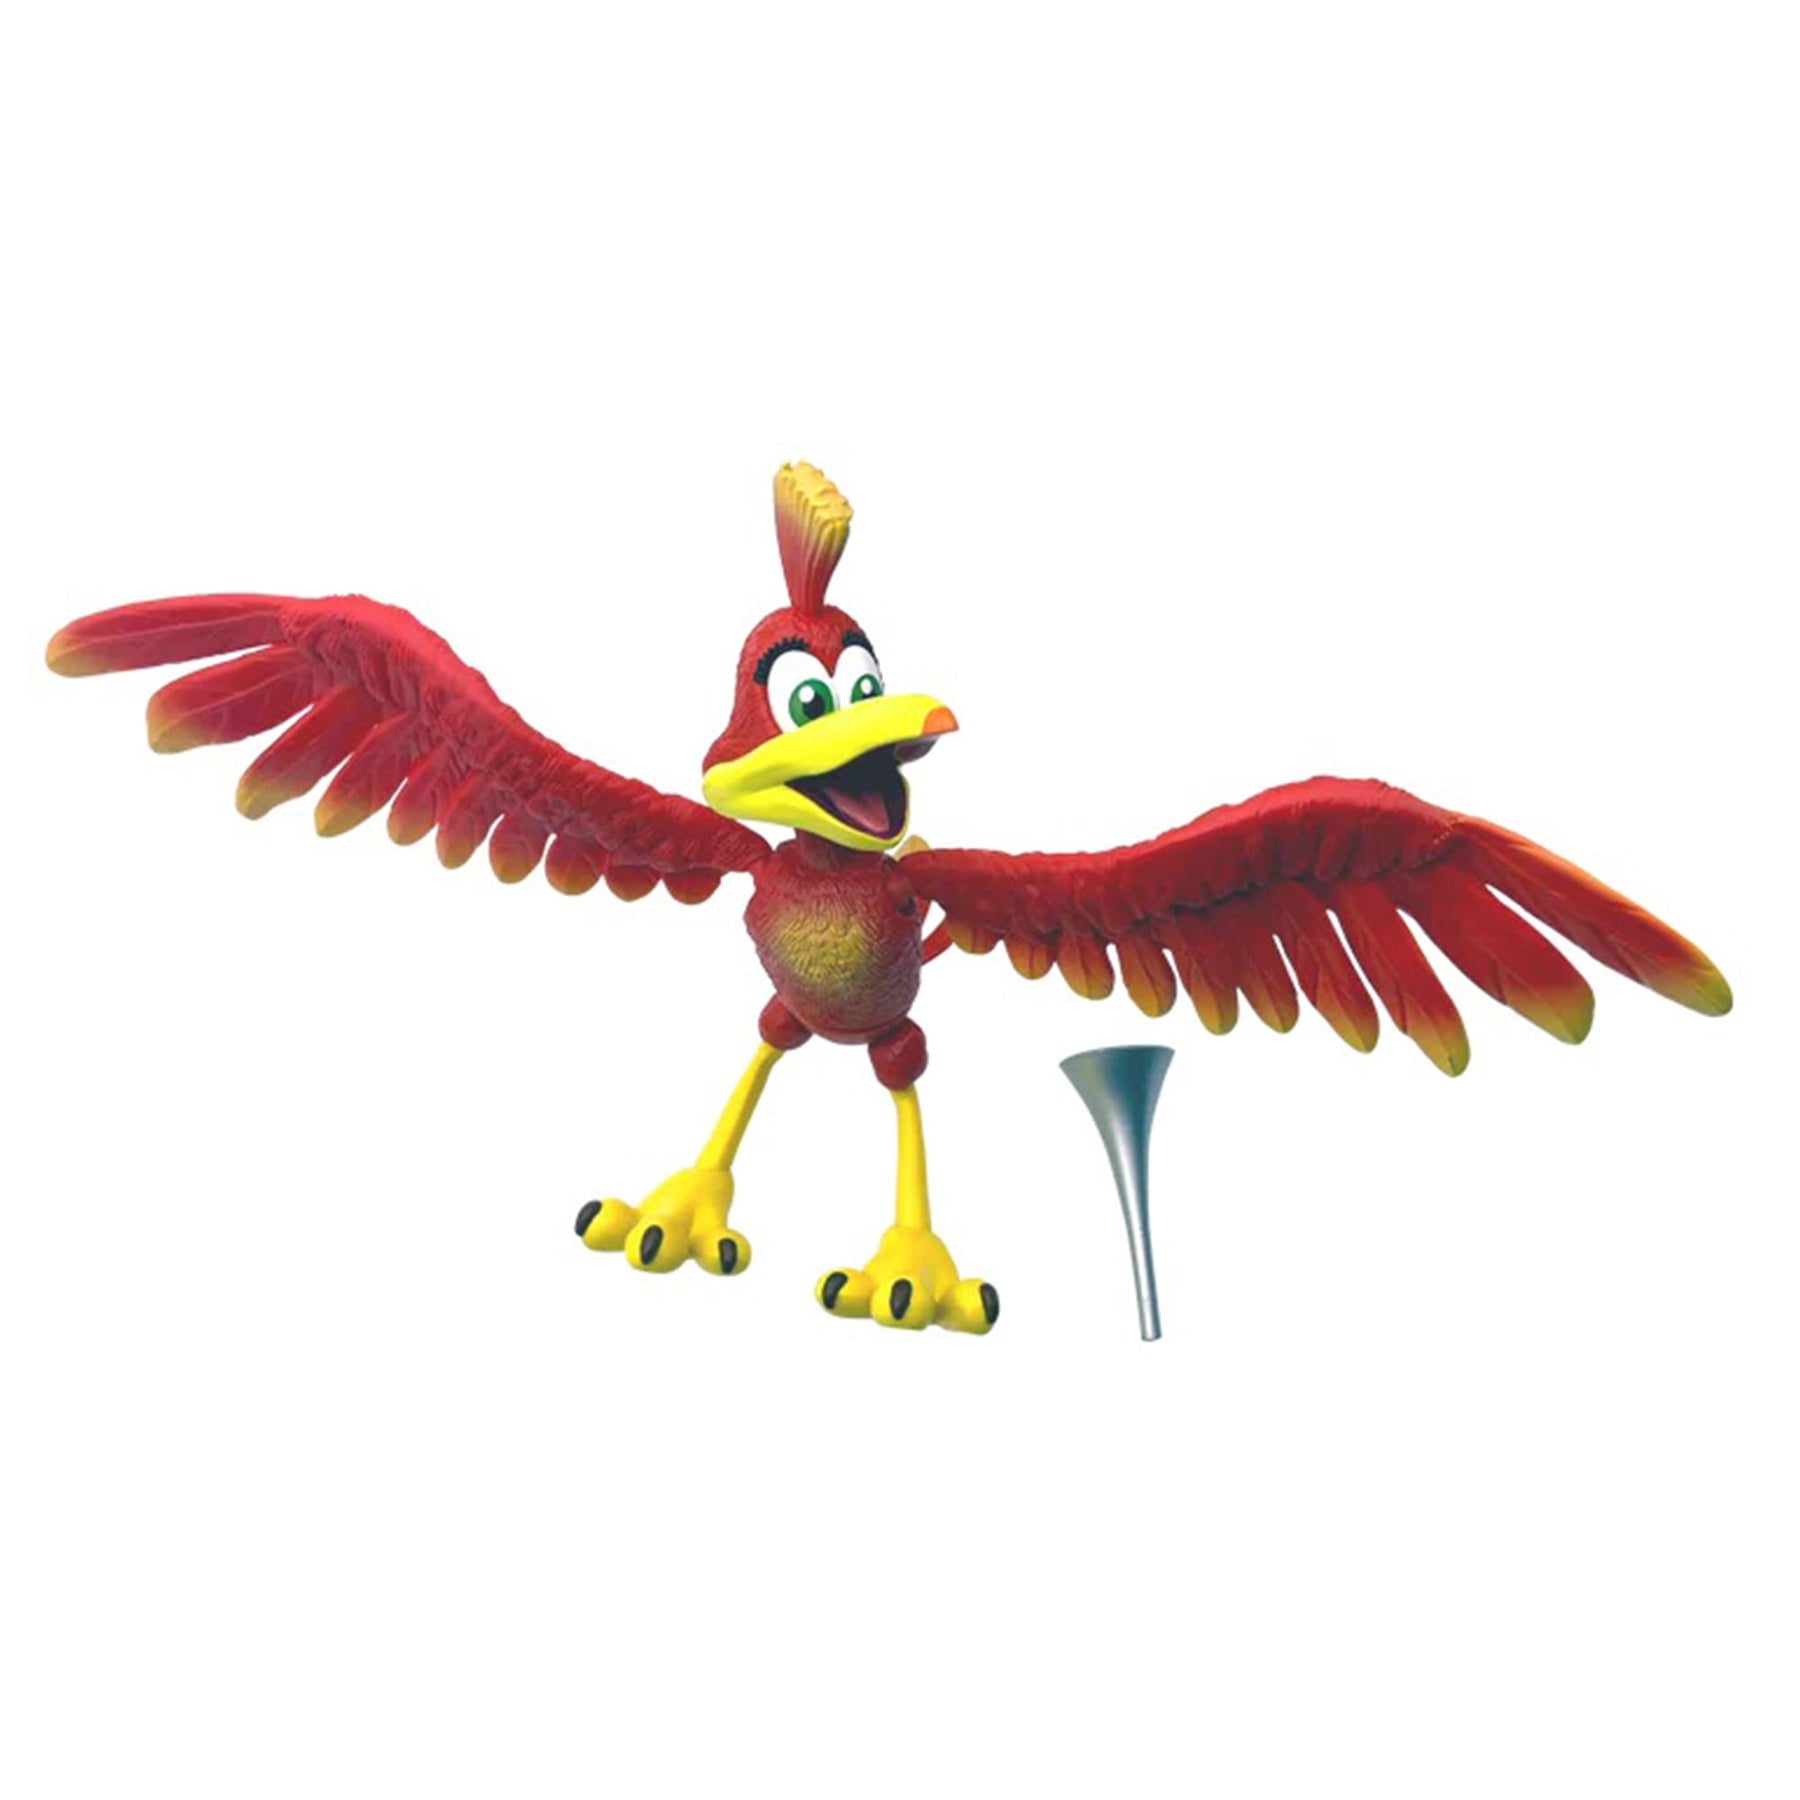 Banjo-Kazooie Flocked Banjo and Kazooie Action Figure 2-Pack | Limited Edition